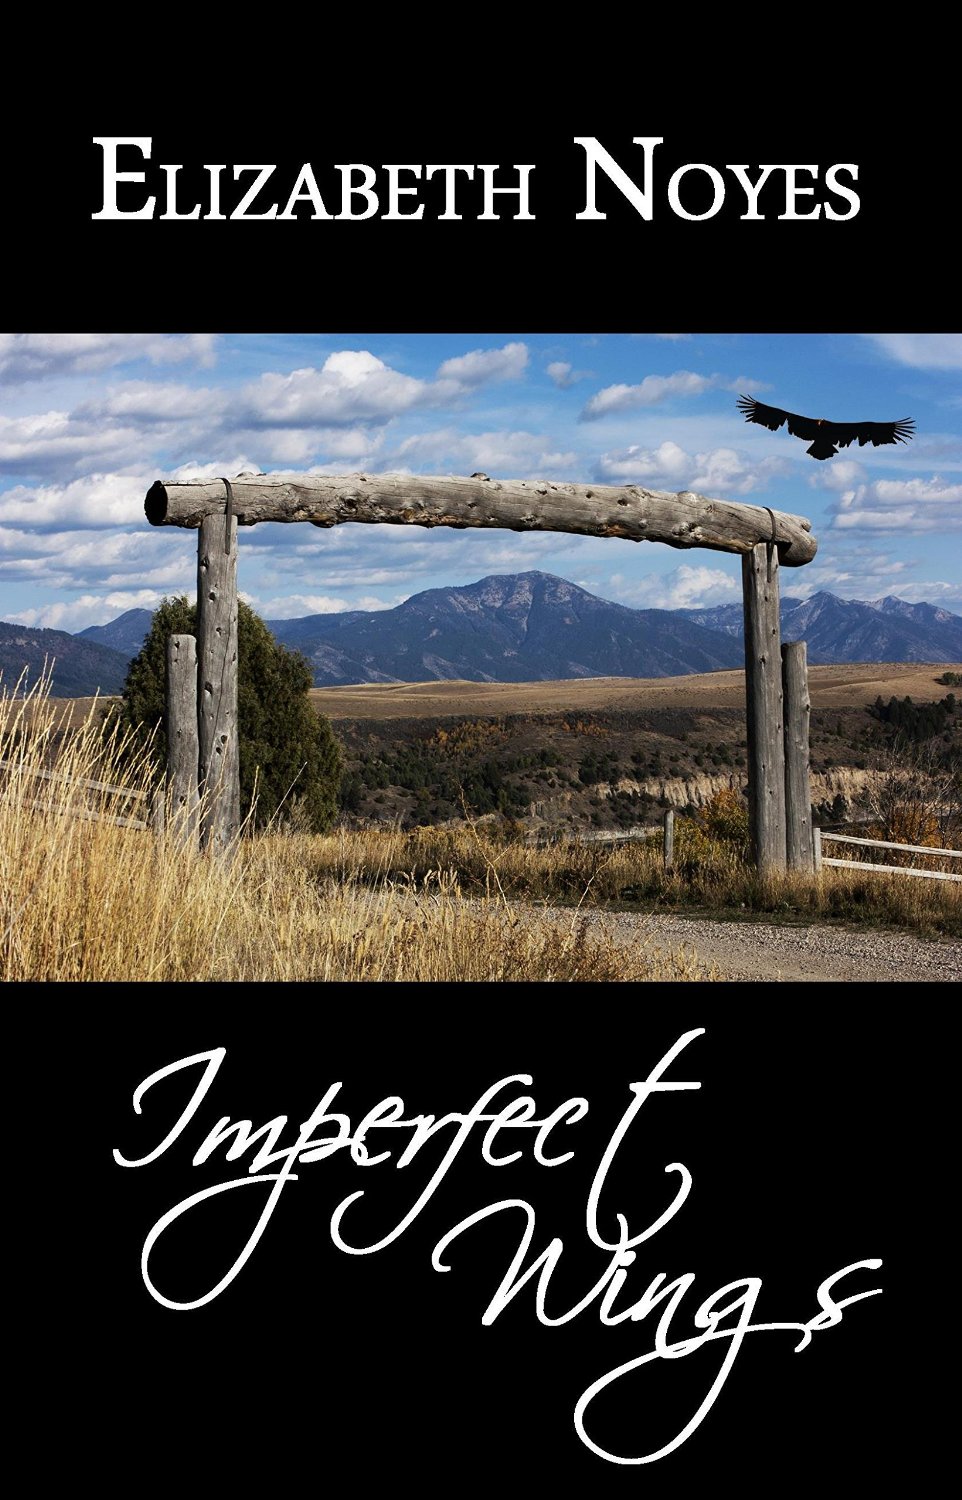 Book Review: Imperfect Wings by Elizabeth Noyes